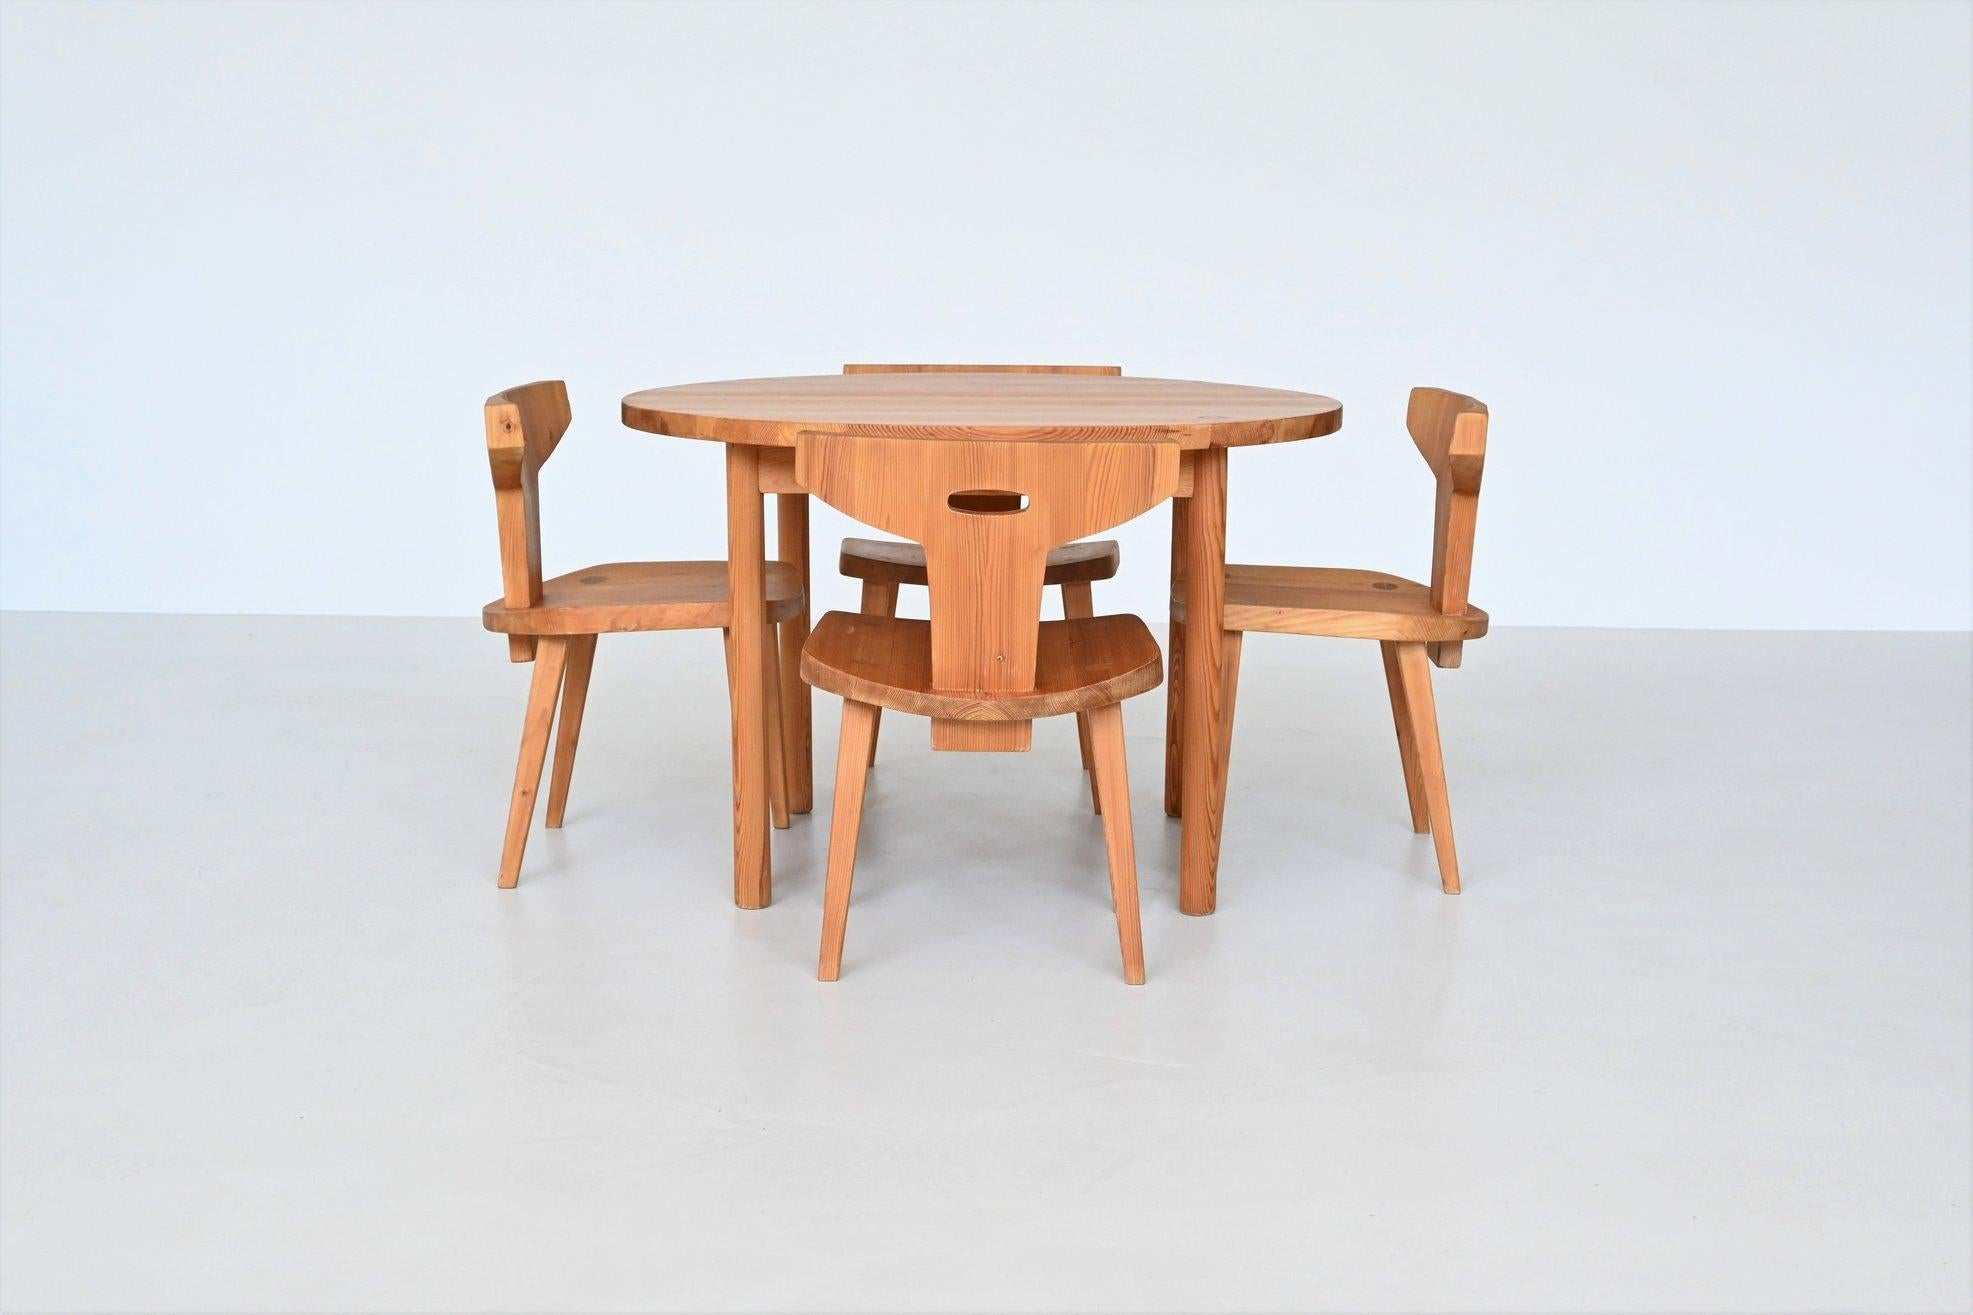 Fantastic shaped dining set designed by Jacob Kielland-Brandt for I. Christiansen, Denmark 1960. The designer won the Cabinetmaker Guild price in Denmark 1960. The set consists of a round dining table including four dining chairs. Super hand-crafted